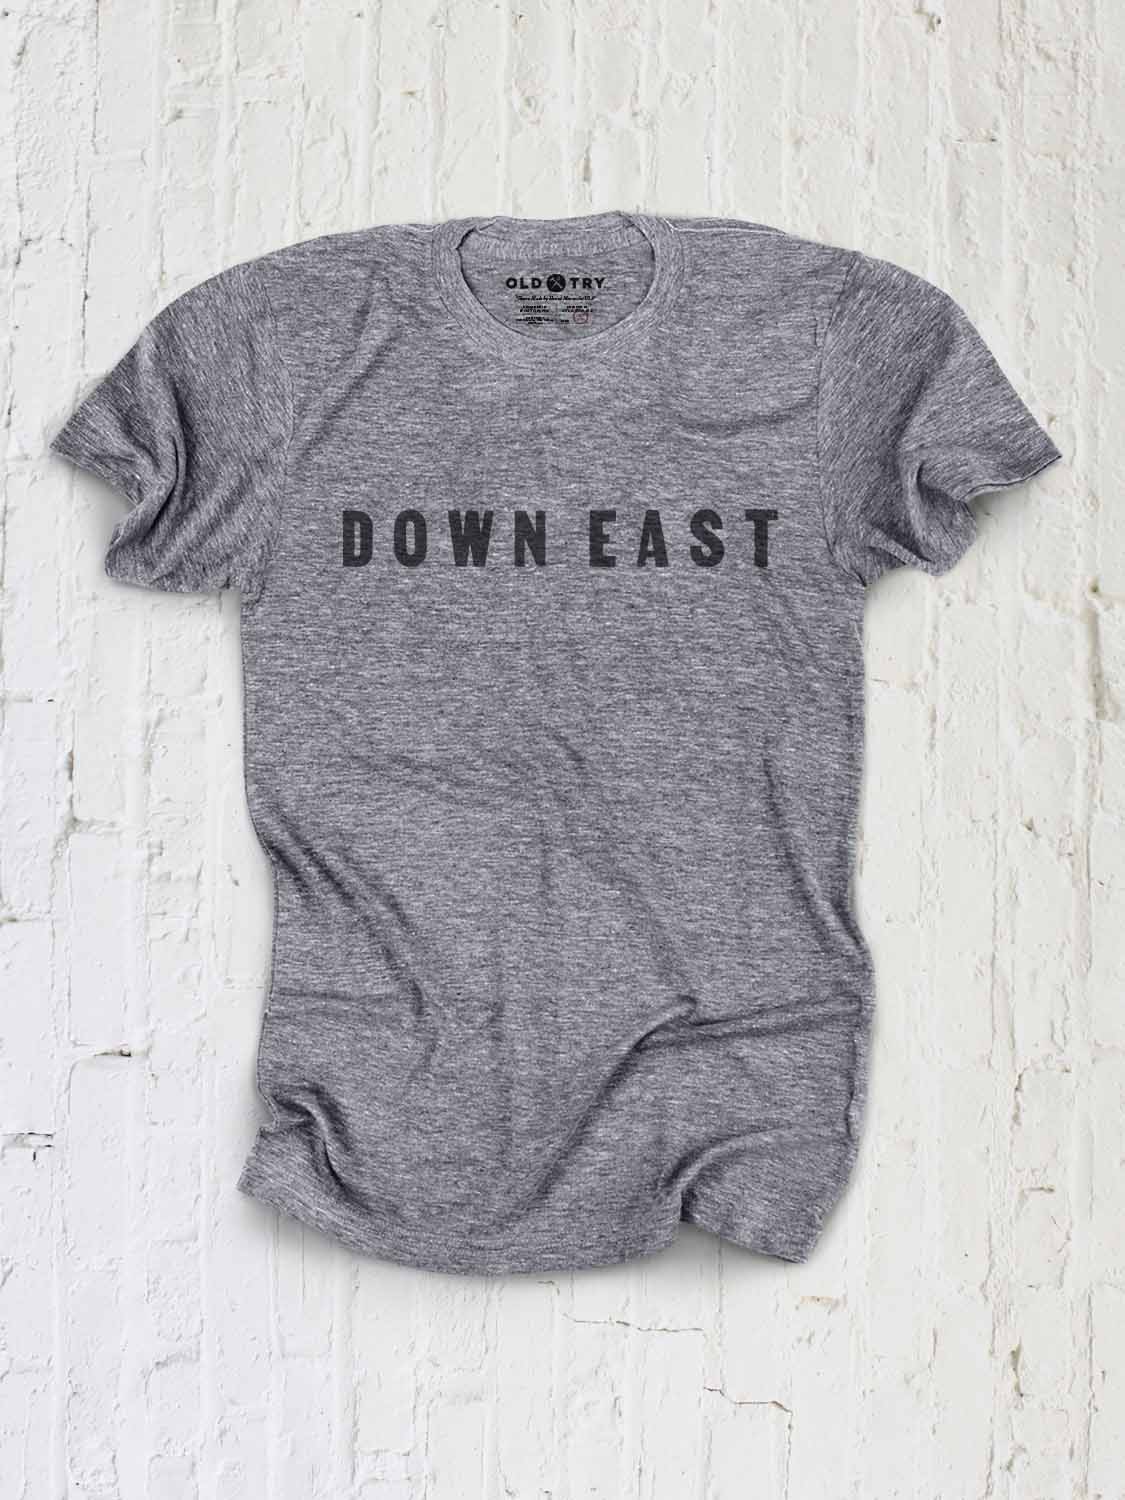 Down East Tshirt – Old Try